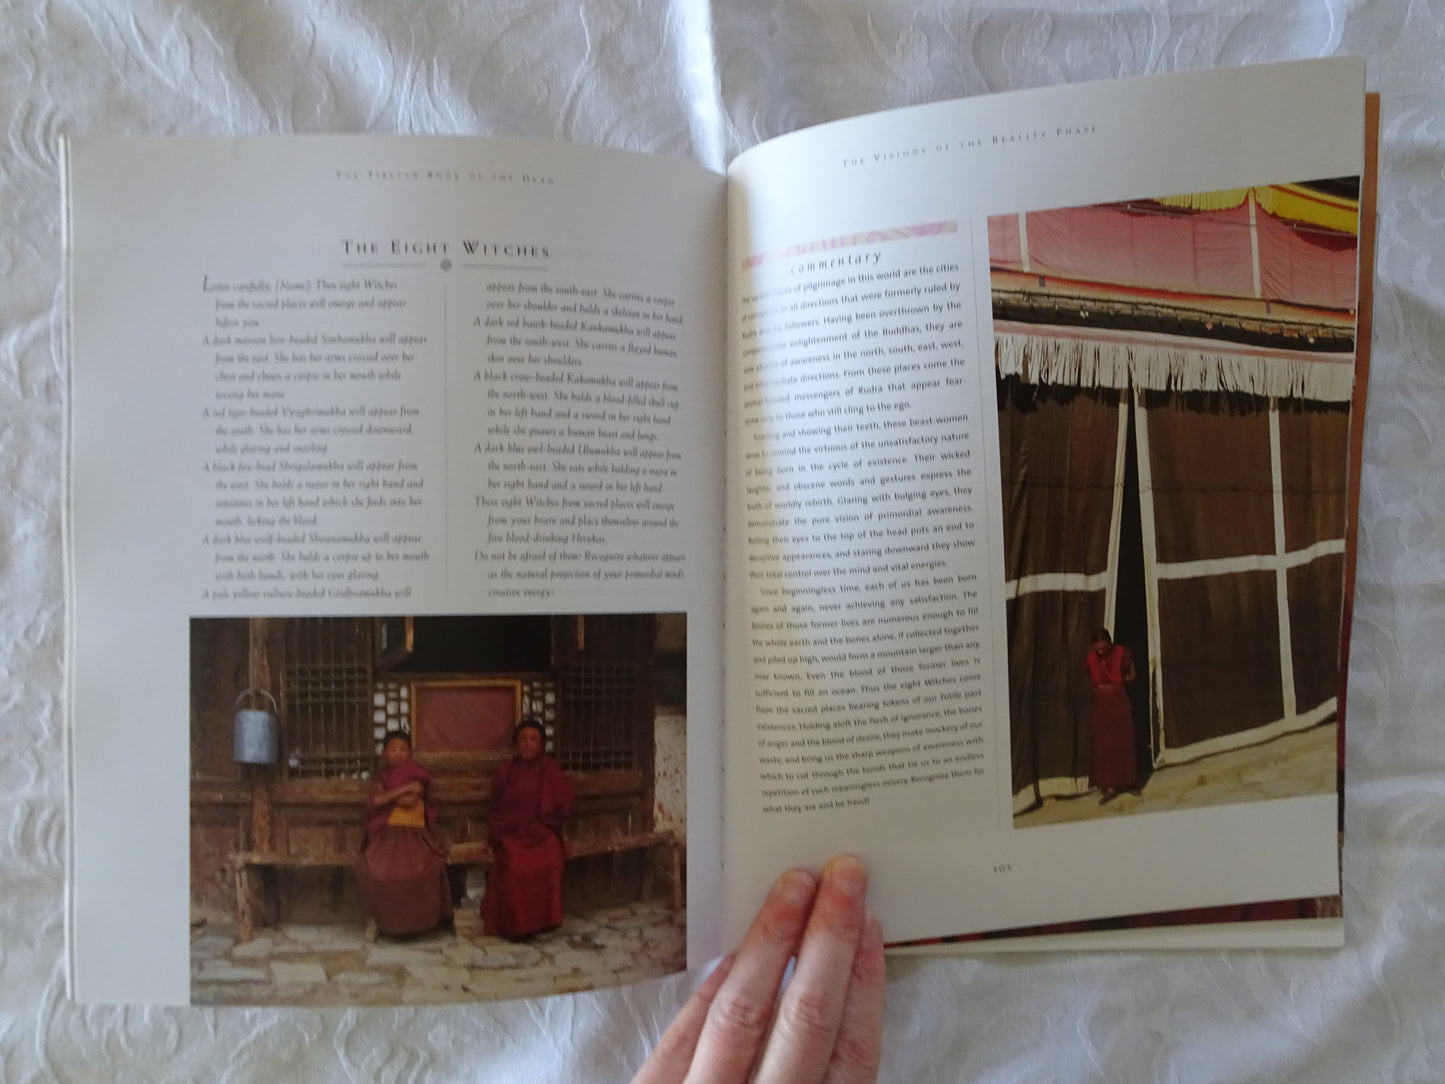 The Illustrated Tibetan Book of the Dead by Stephen Hodge